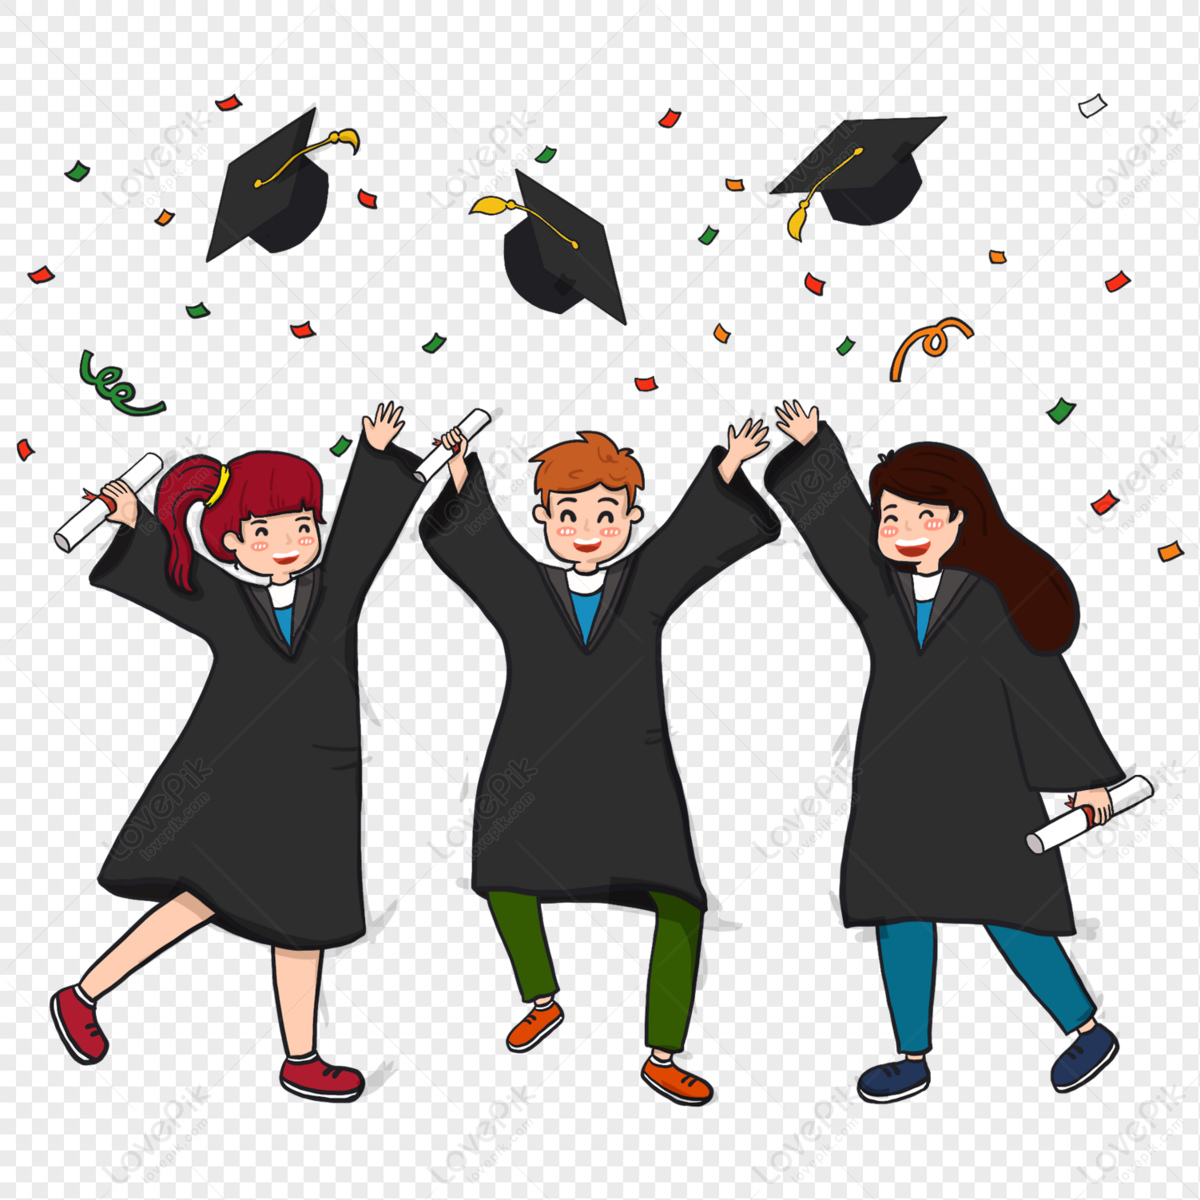 Lost Graduates PNG Images With Transparent Background | Free Download ...